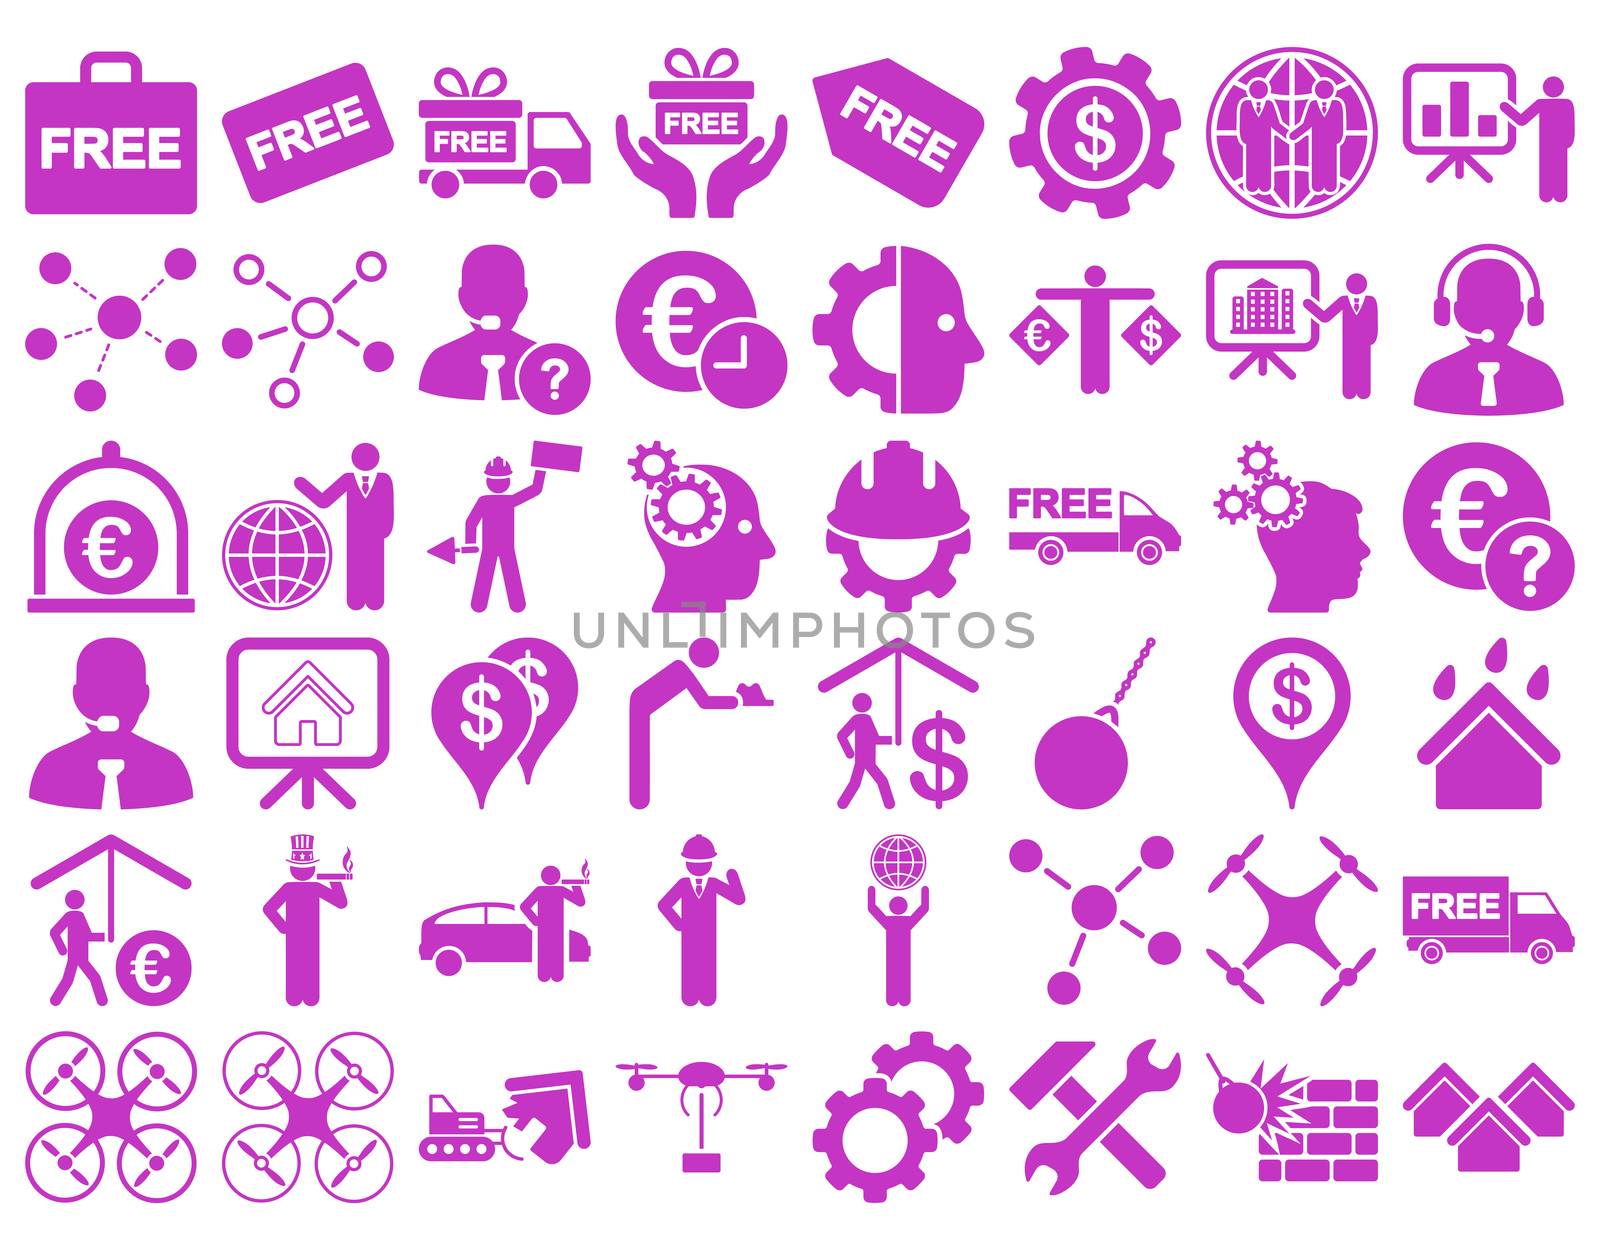 Business Icon Set. These flat icons use violet color. Raster images are isolated on a white background.